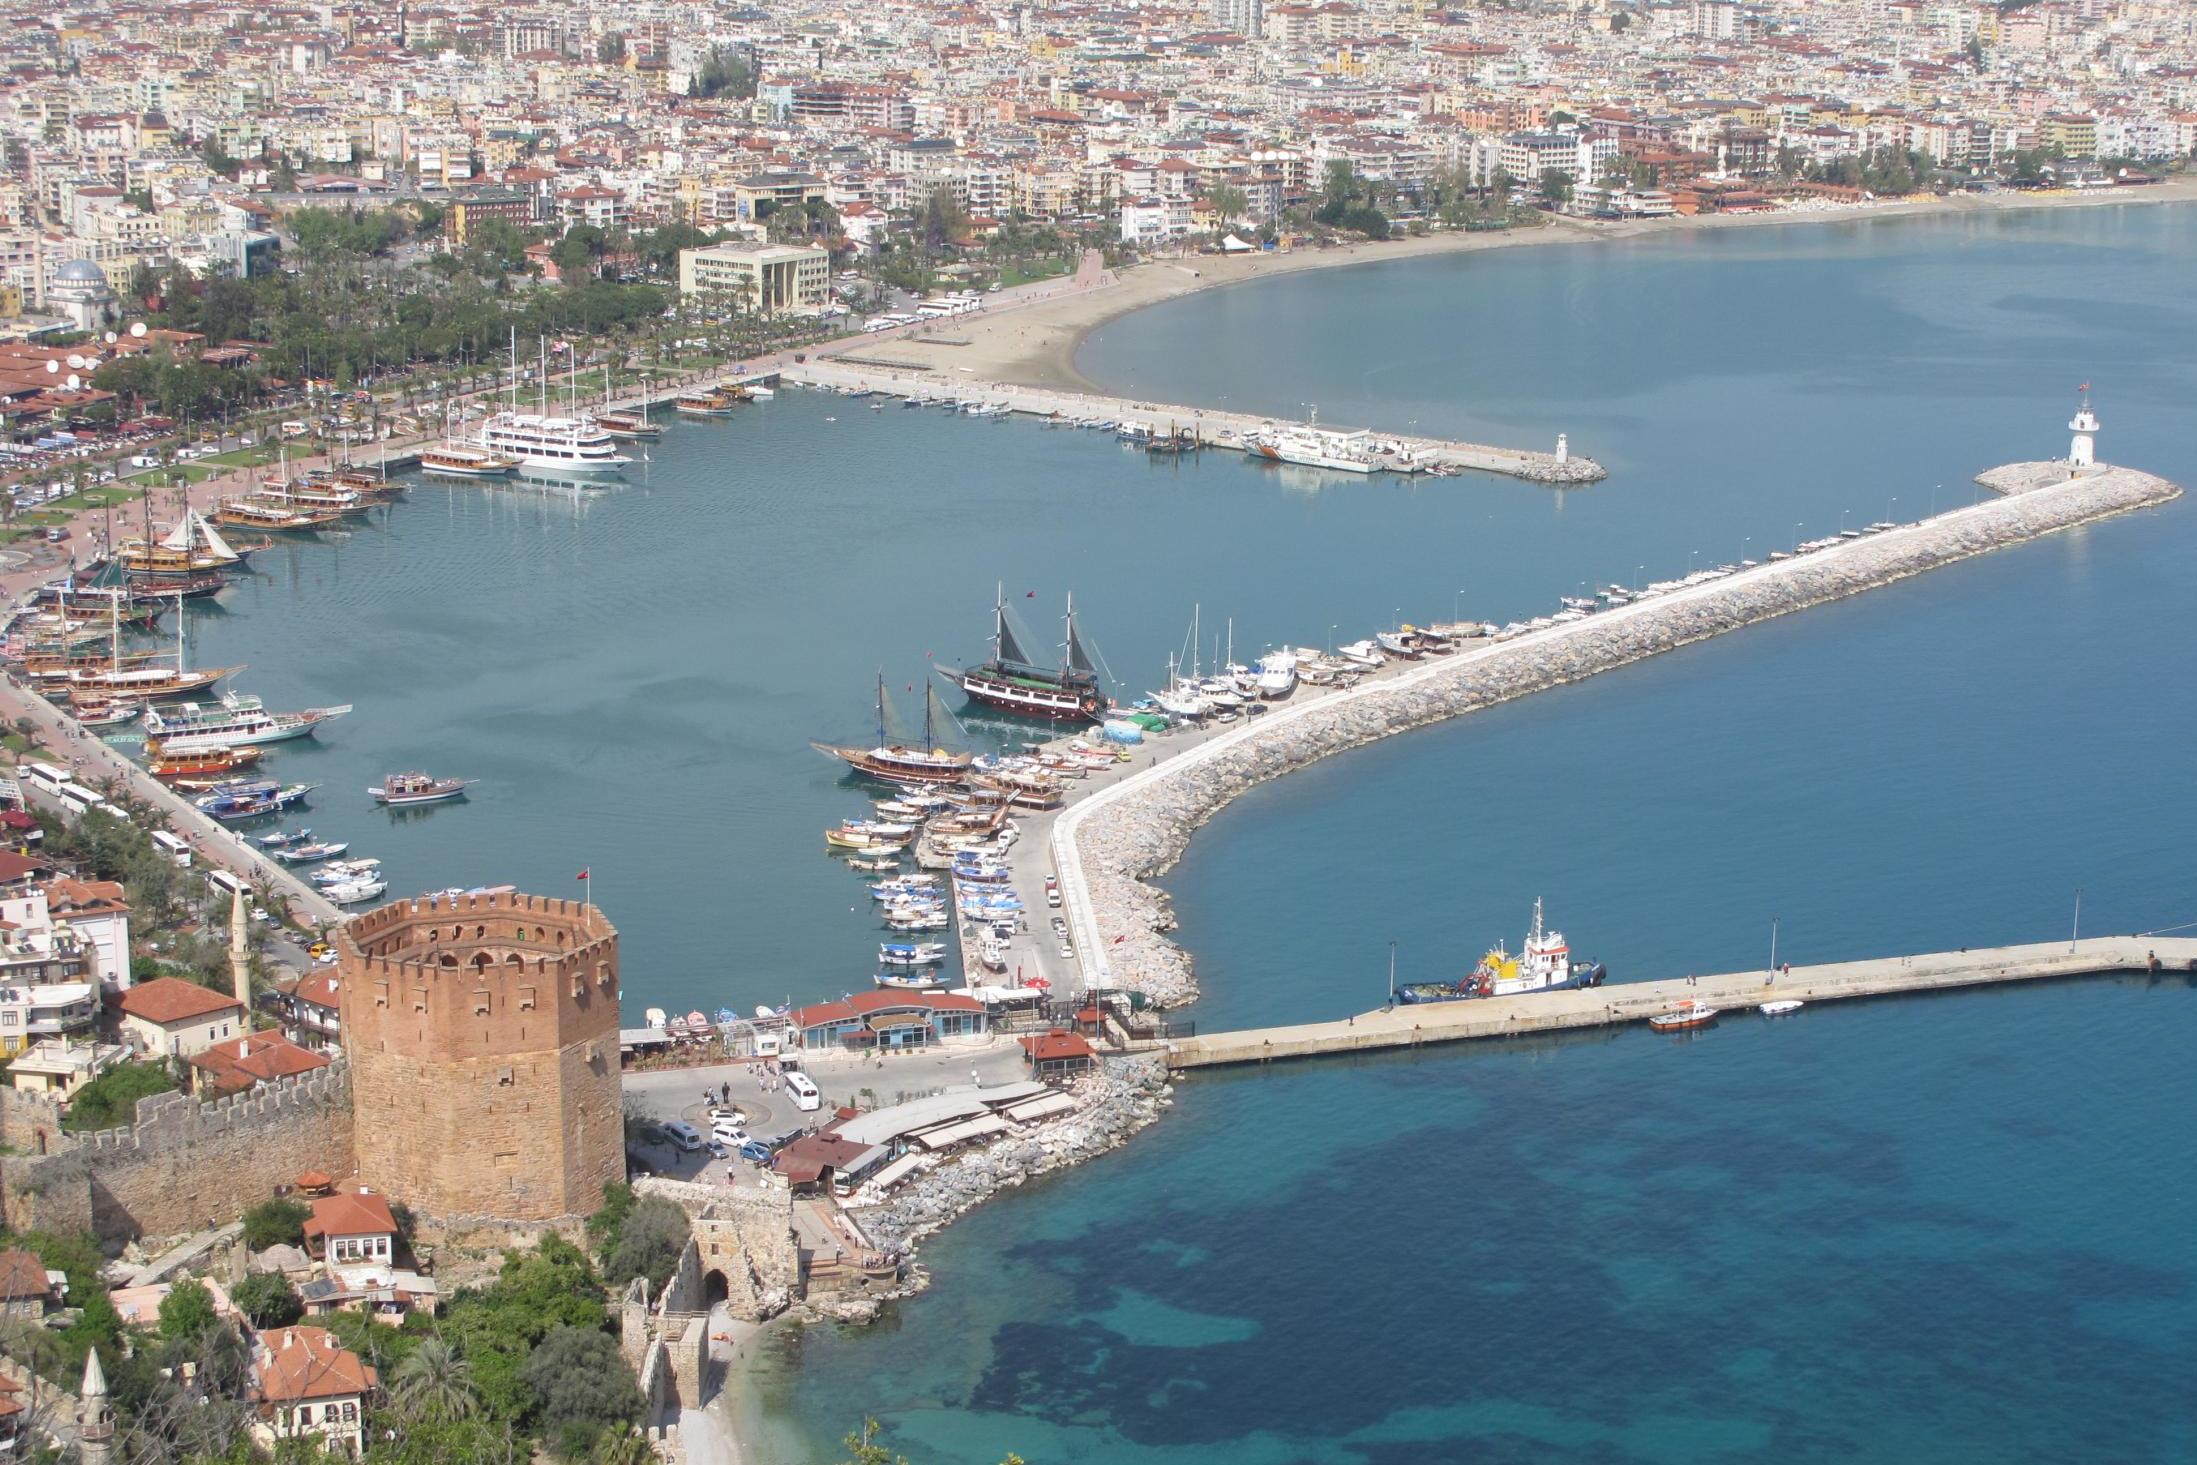 Demand for resorts such as Antalya in Turkey remains strong